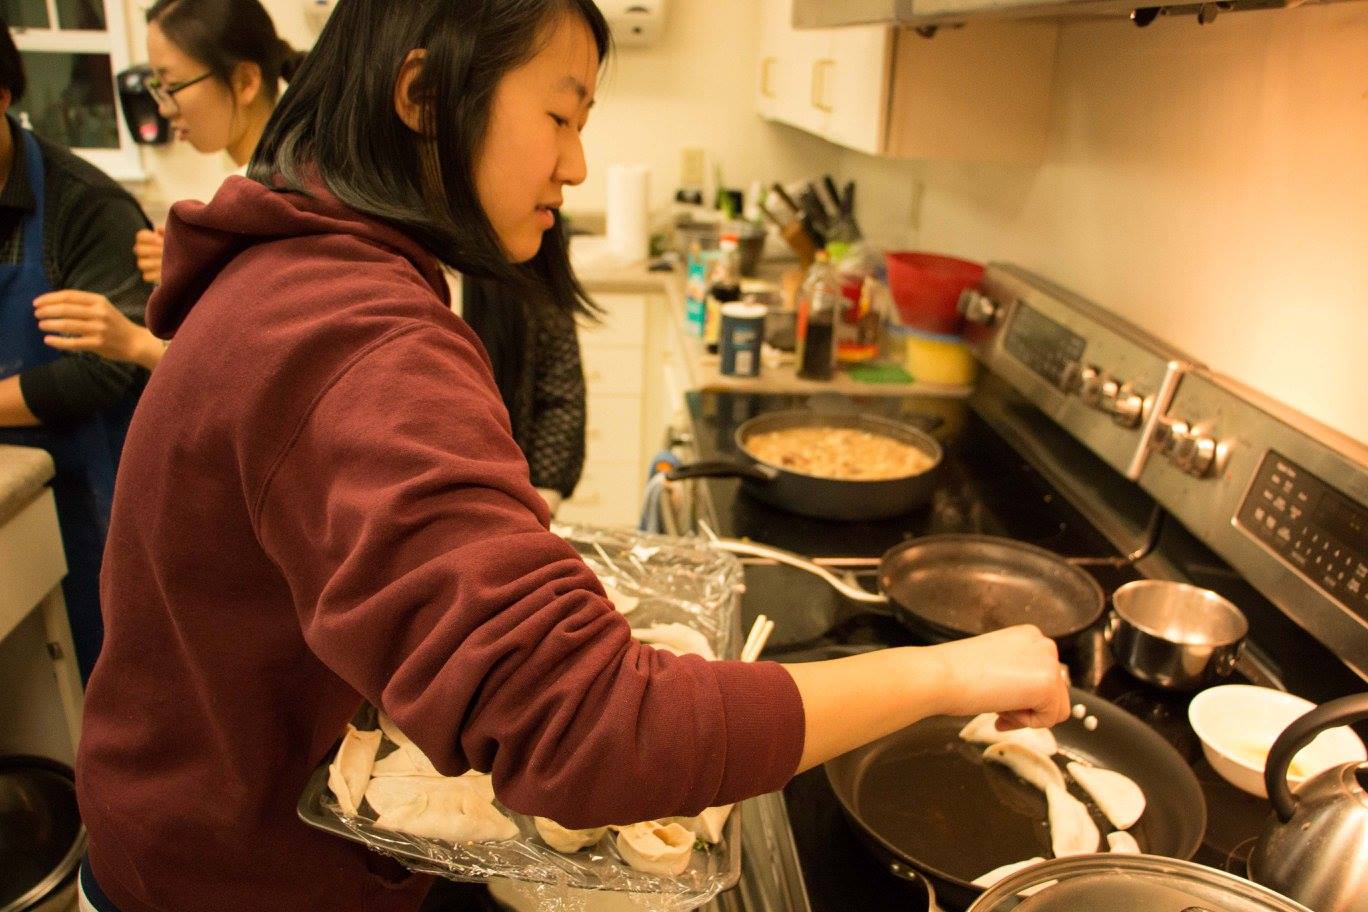 This photo shows a young dark haired woman holding a large tray of uncooked dumplings and placing a dumpling into a frying pan on a stovetop in a kitchen.